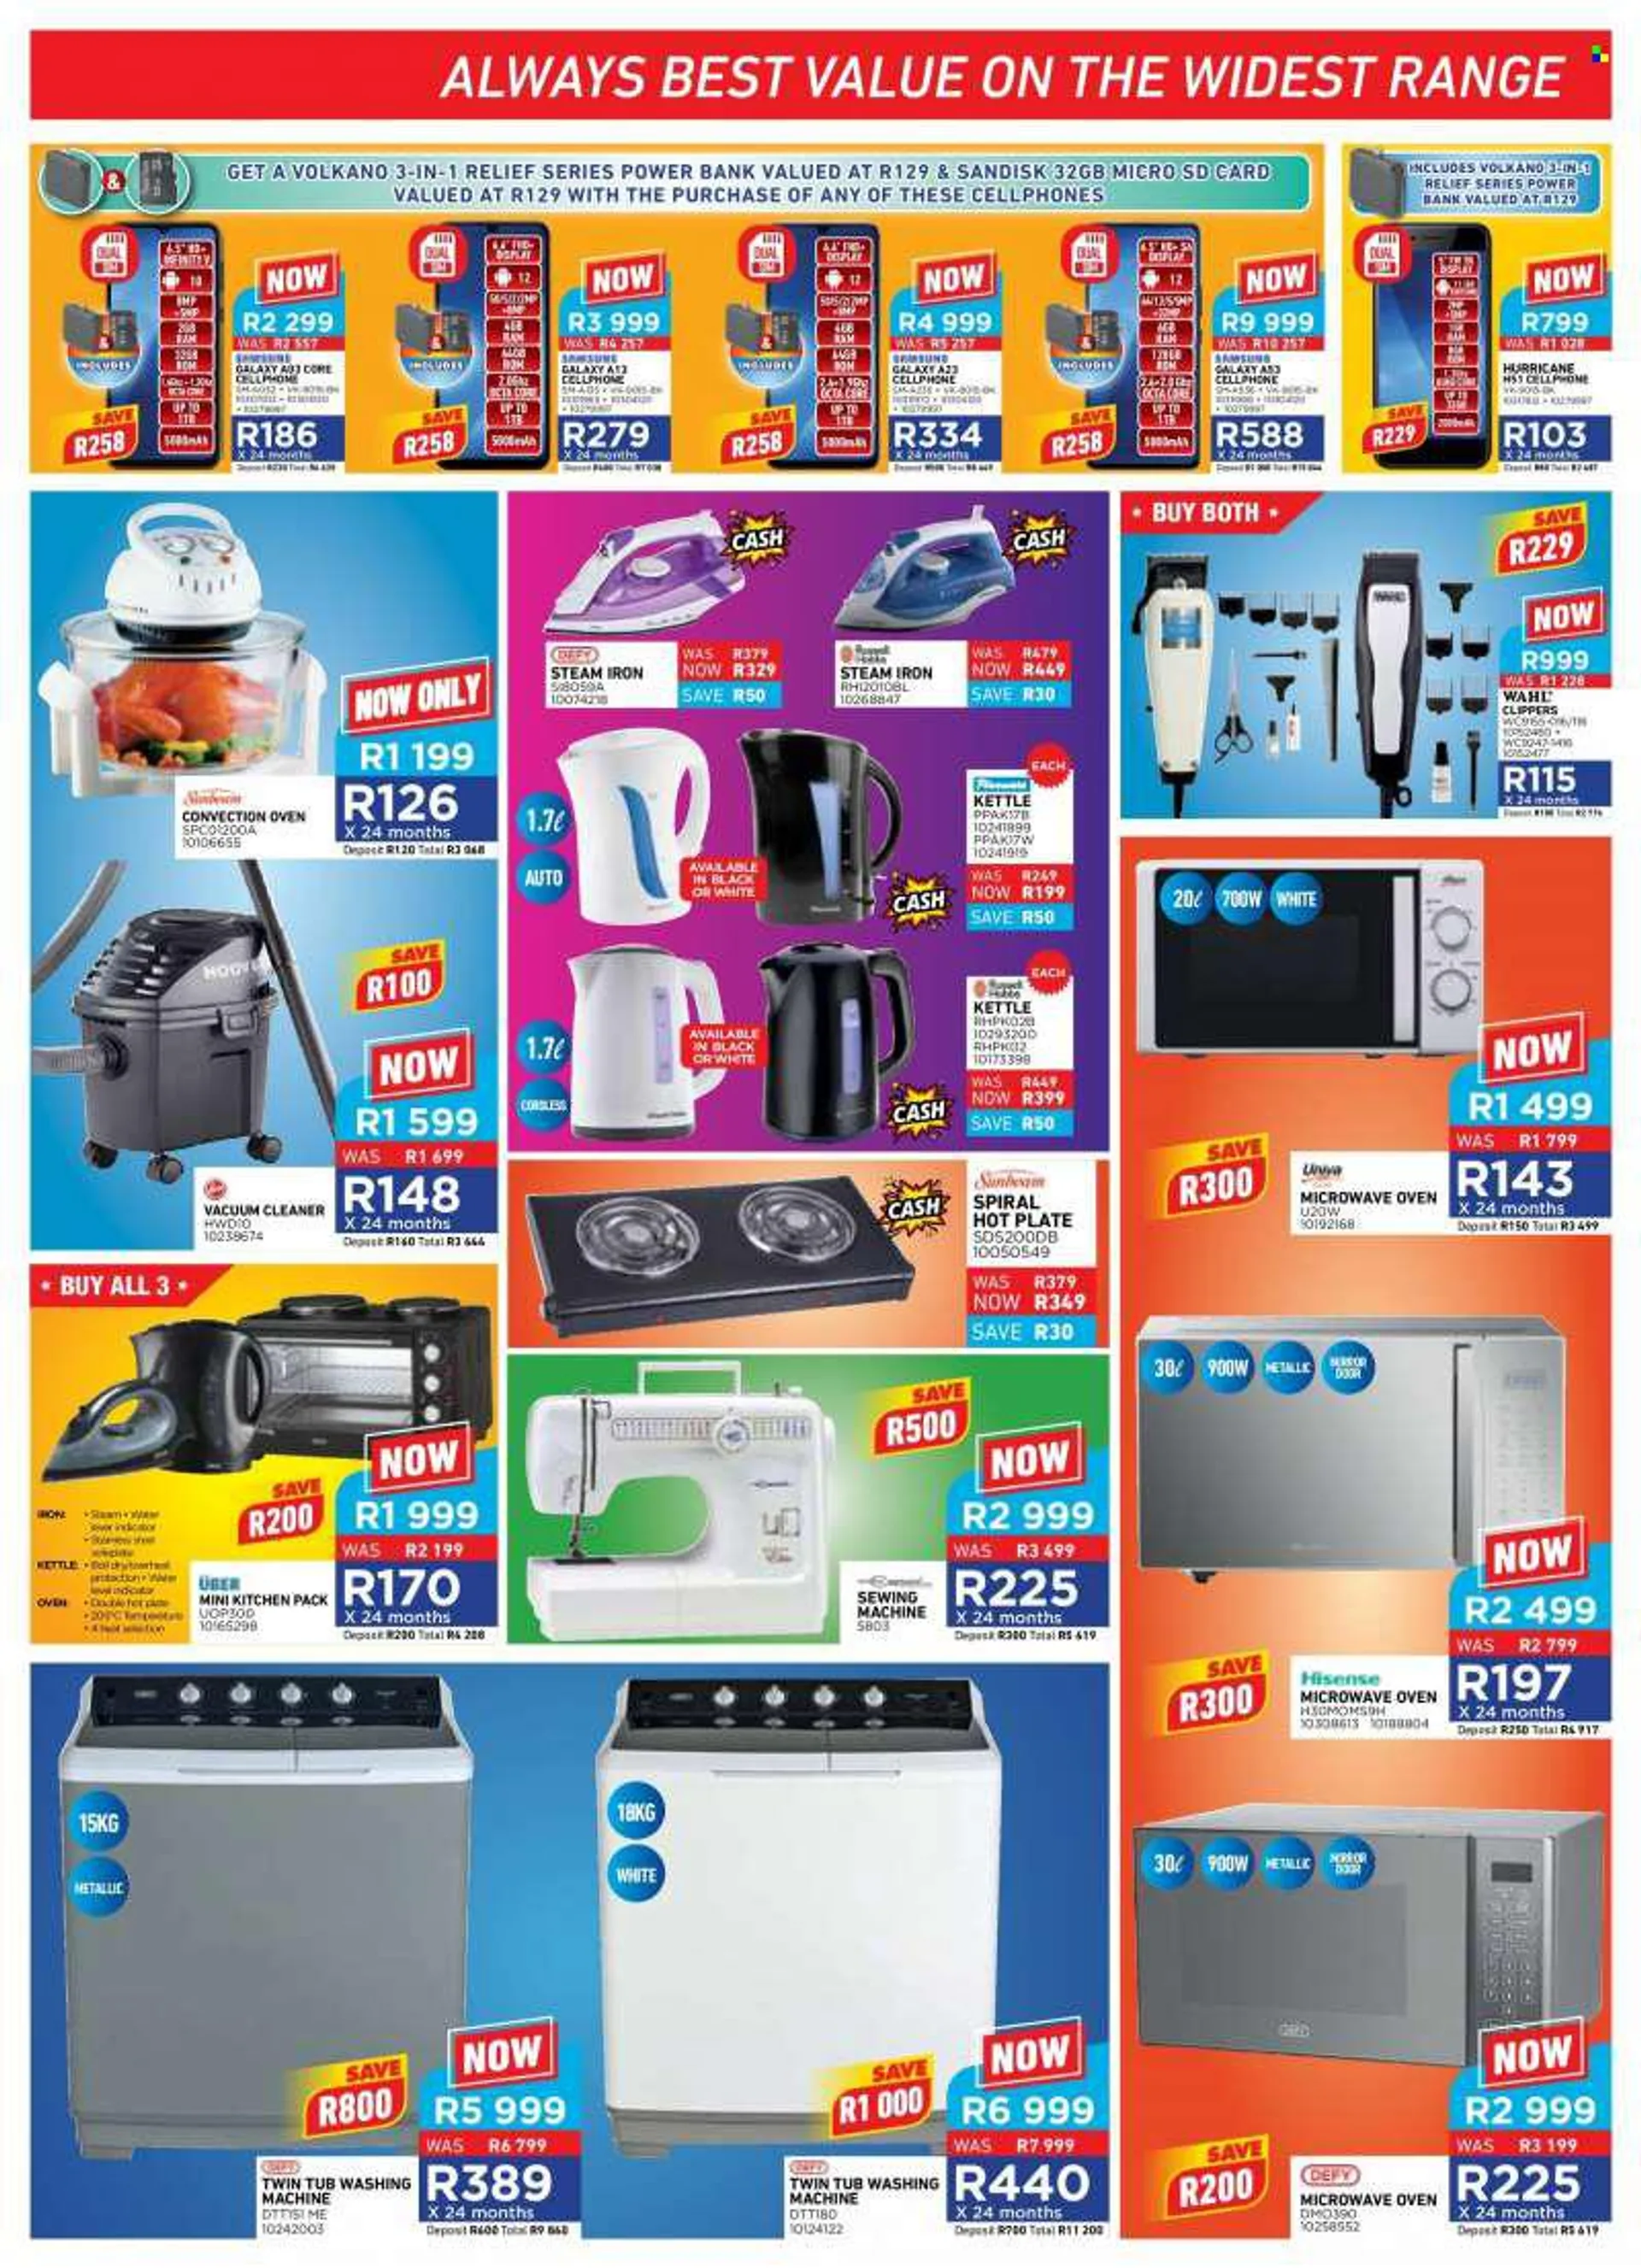 Furnmart catalogue  - 11/07/2022 - 13/08/2022 - Sales products - mirror, Sandisk, cell phone, memory card, power bank, Volkano, oven, convection oven, microwave oven, washing machine, vacuum cleaner, kettle, iron, steam iron, sewing machine, mini-kitchen.